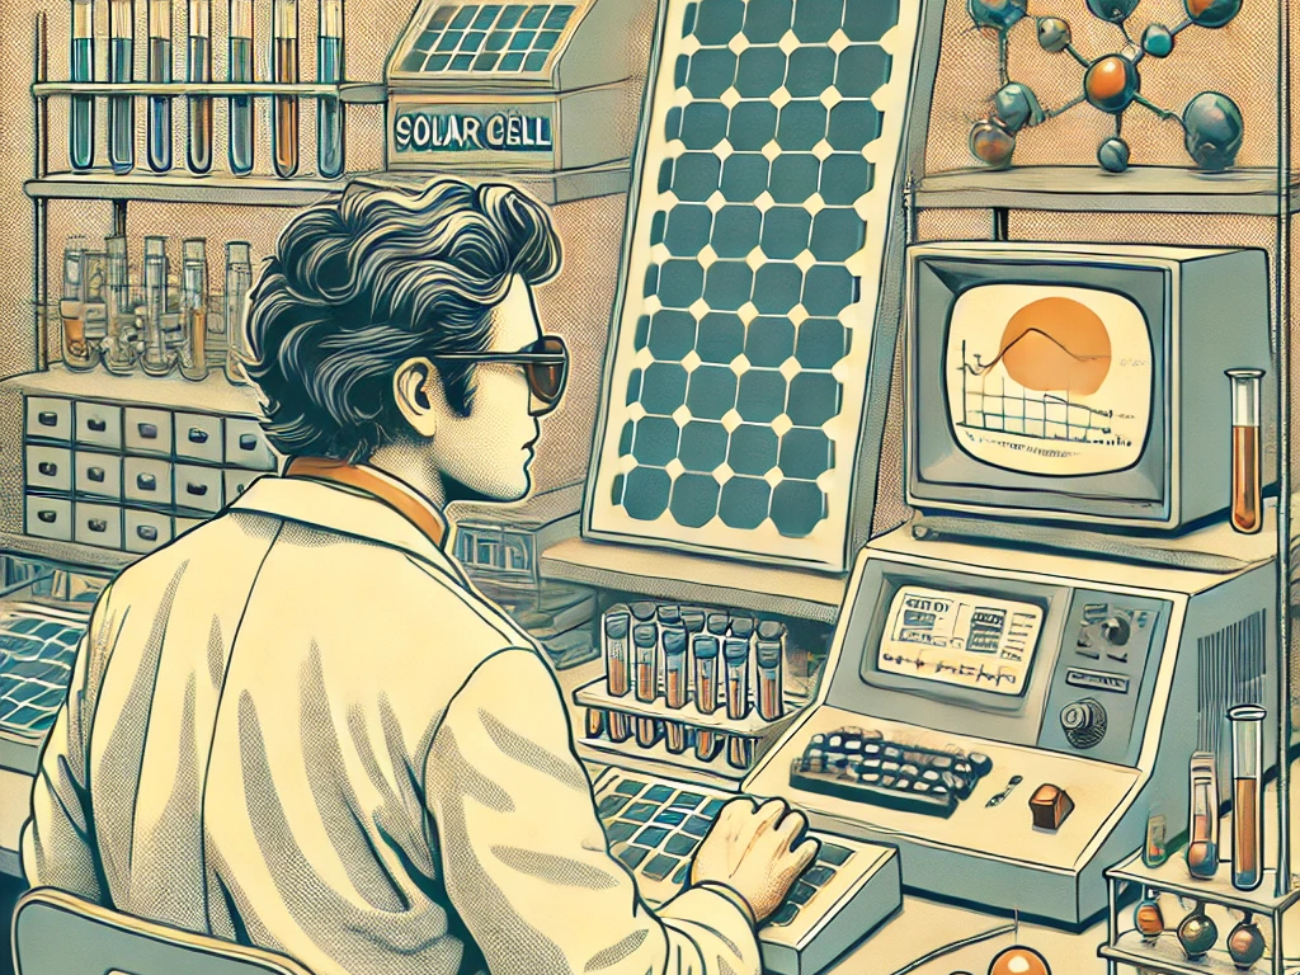 DALL·E 2024-06-27 15.22.03 - A 1980s-themed illustration of a scientist in a lab coat working with early solar cell technology. The scene shows the scientist using vintage equipme